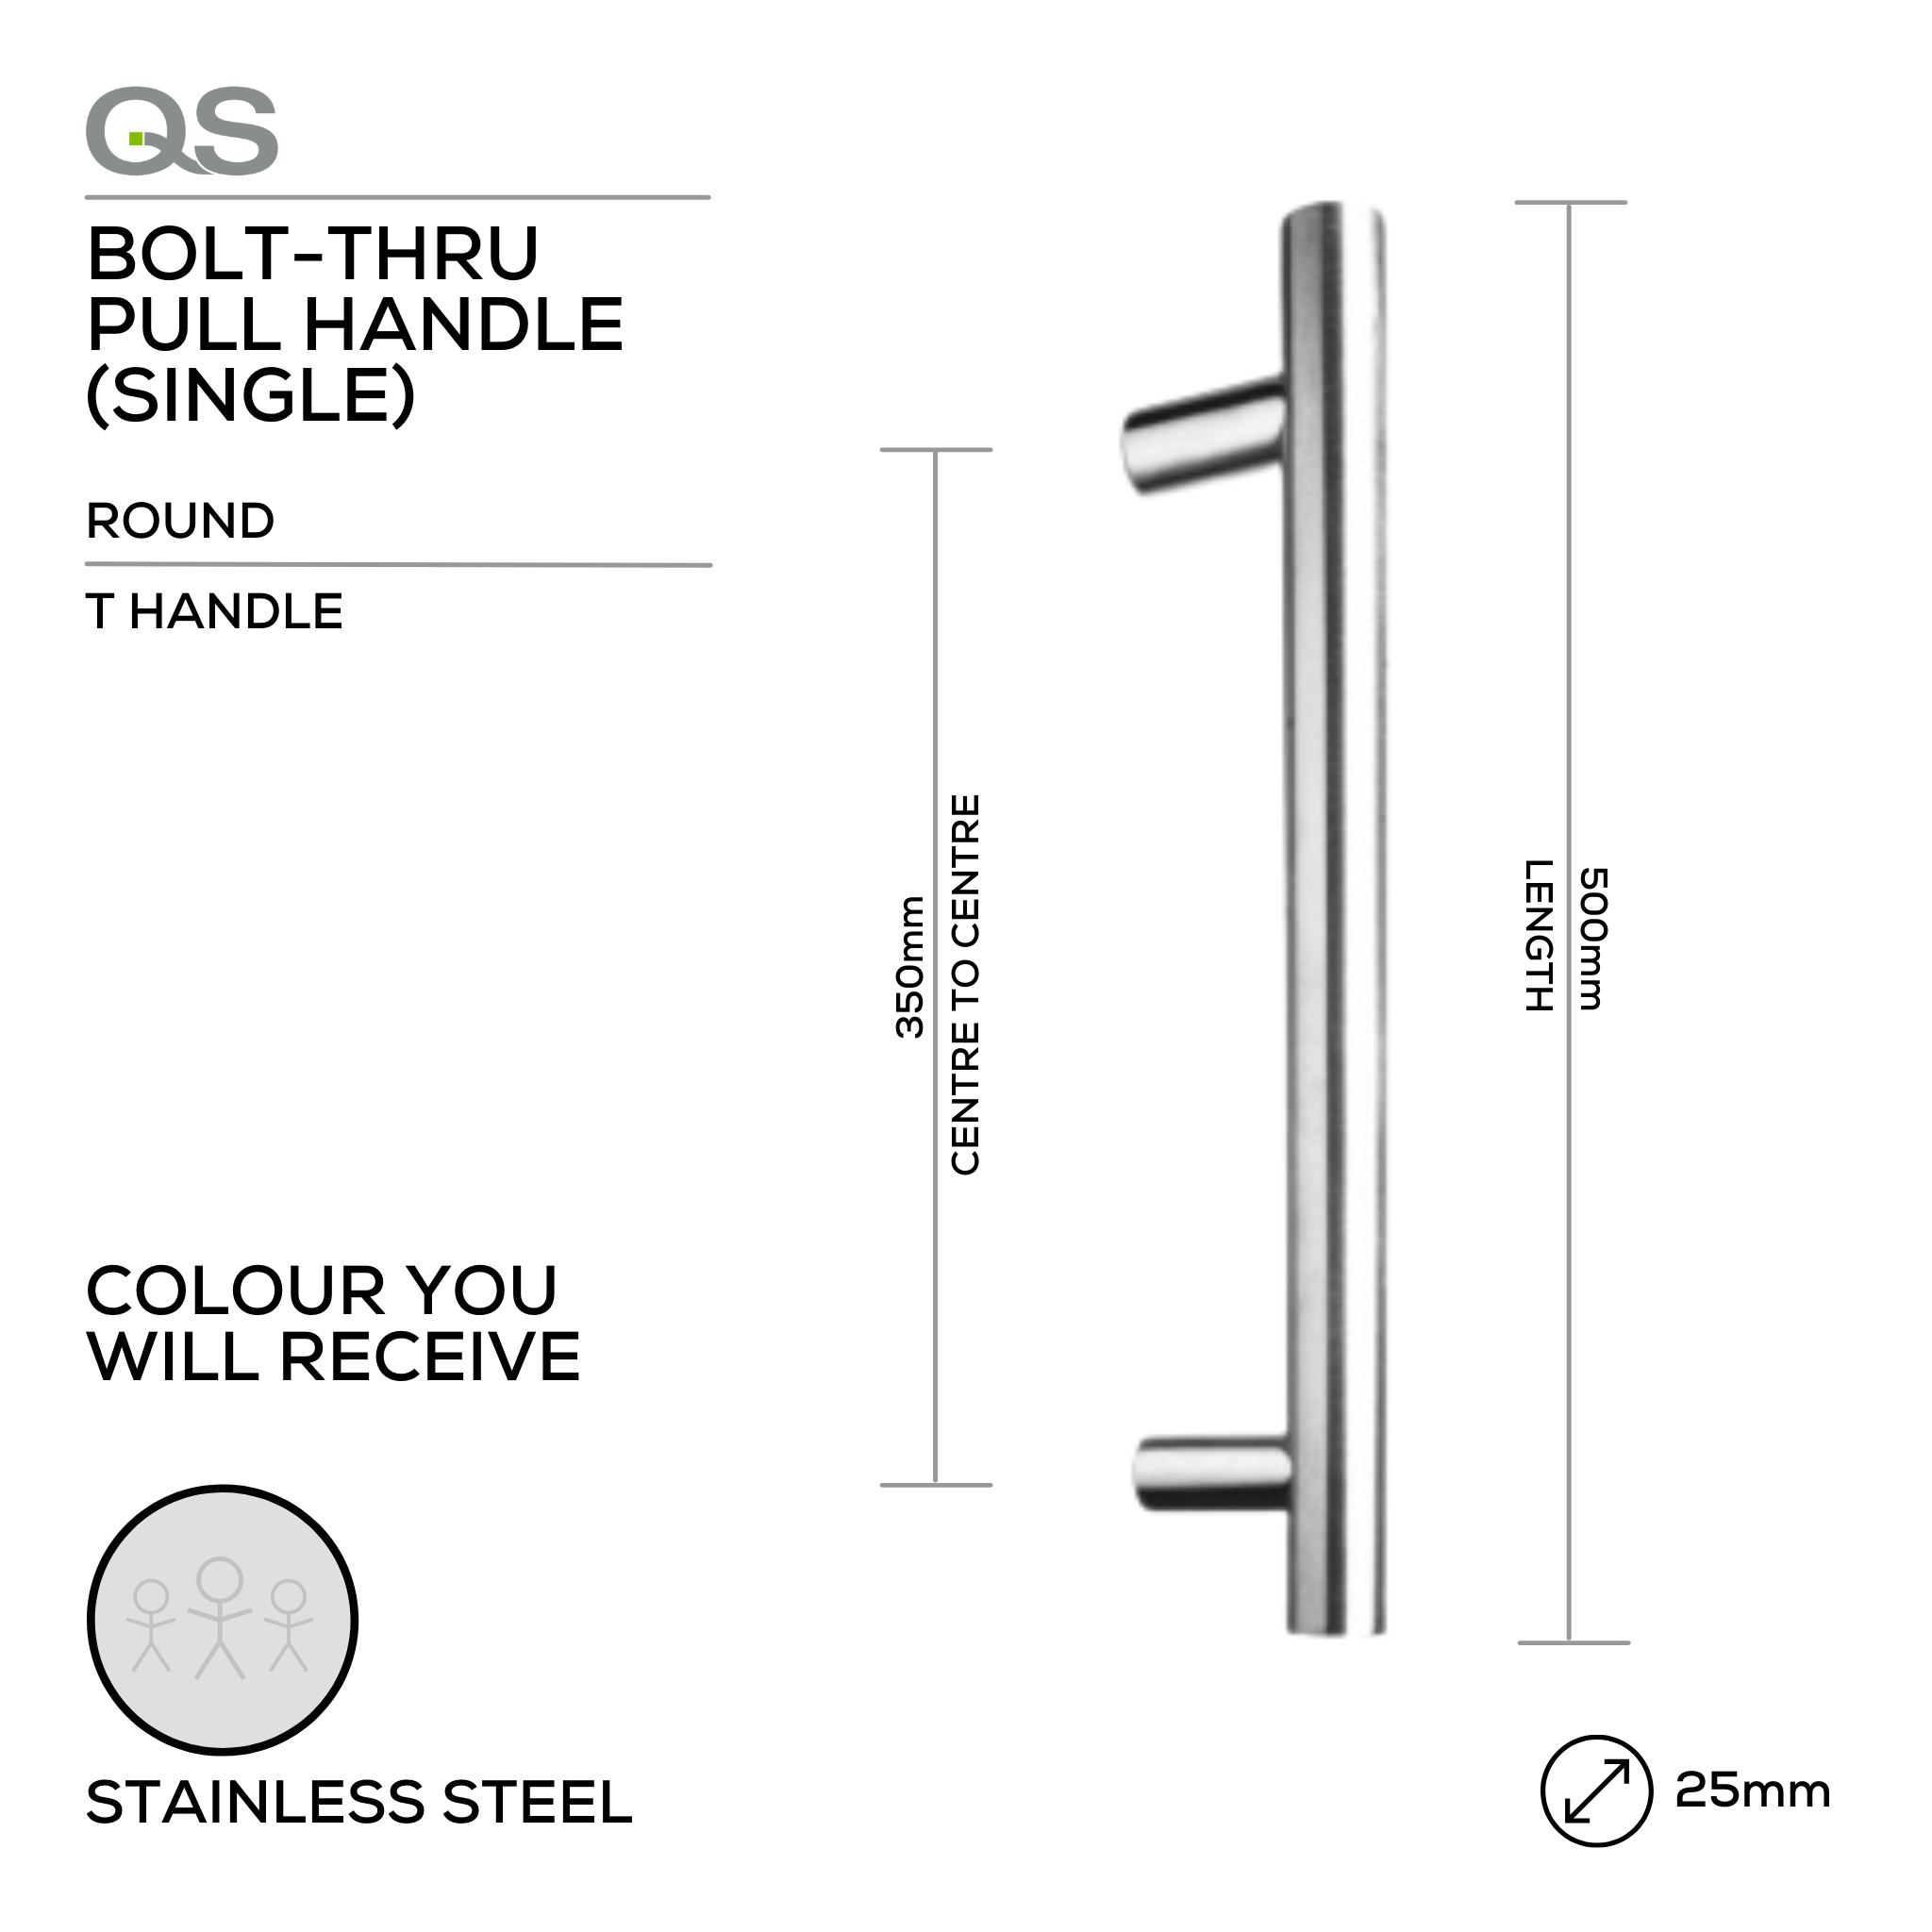 QS2502/1 T Handle, Pull Handle, Round, T Handle, BoltThru, 25mm (Ø) x 500mm (l) x 350mm (ctc), Stainless Steel, QS